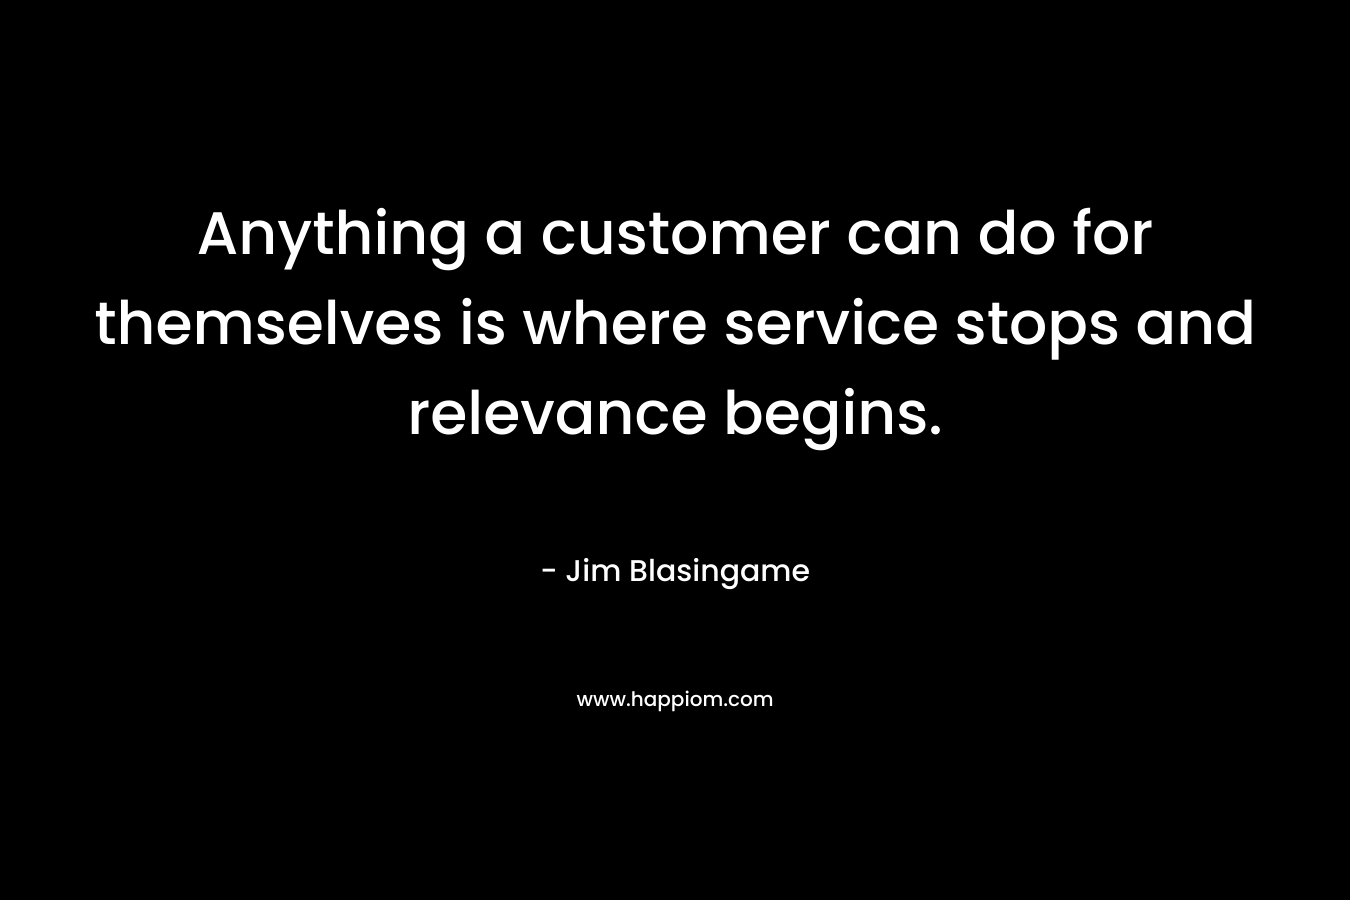 Anything a customer can do for themselves is where service stops and relevance begins. – Jim Blasingame